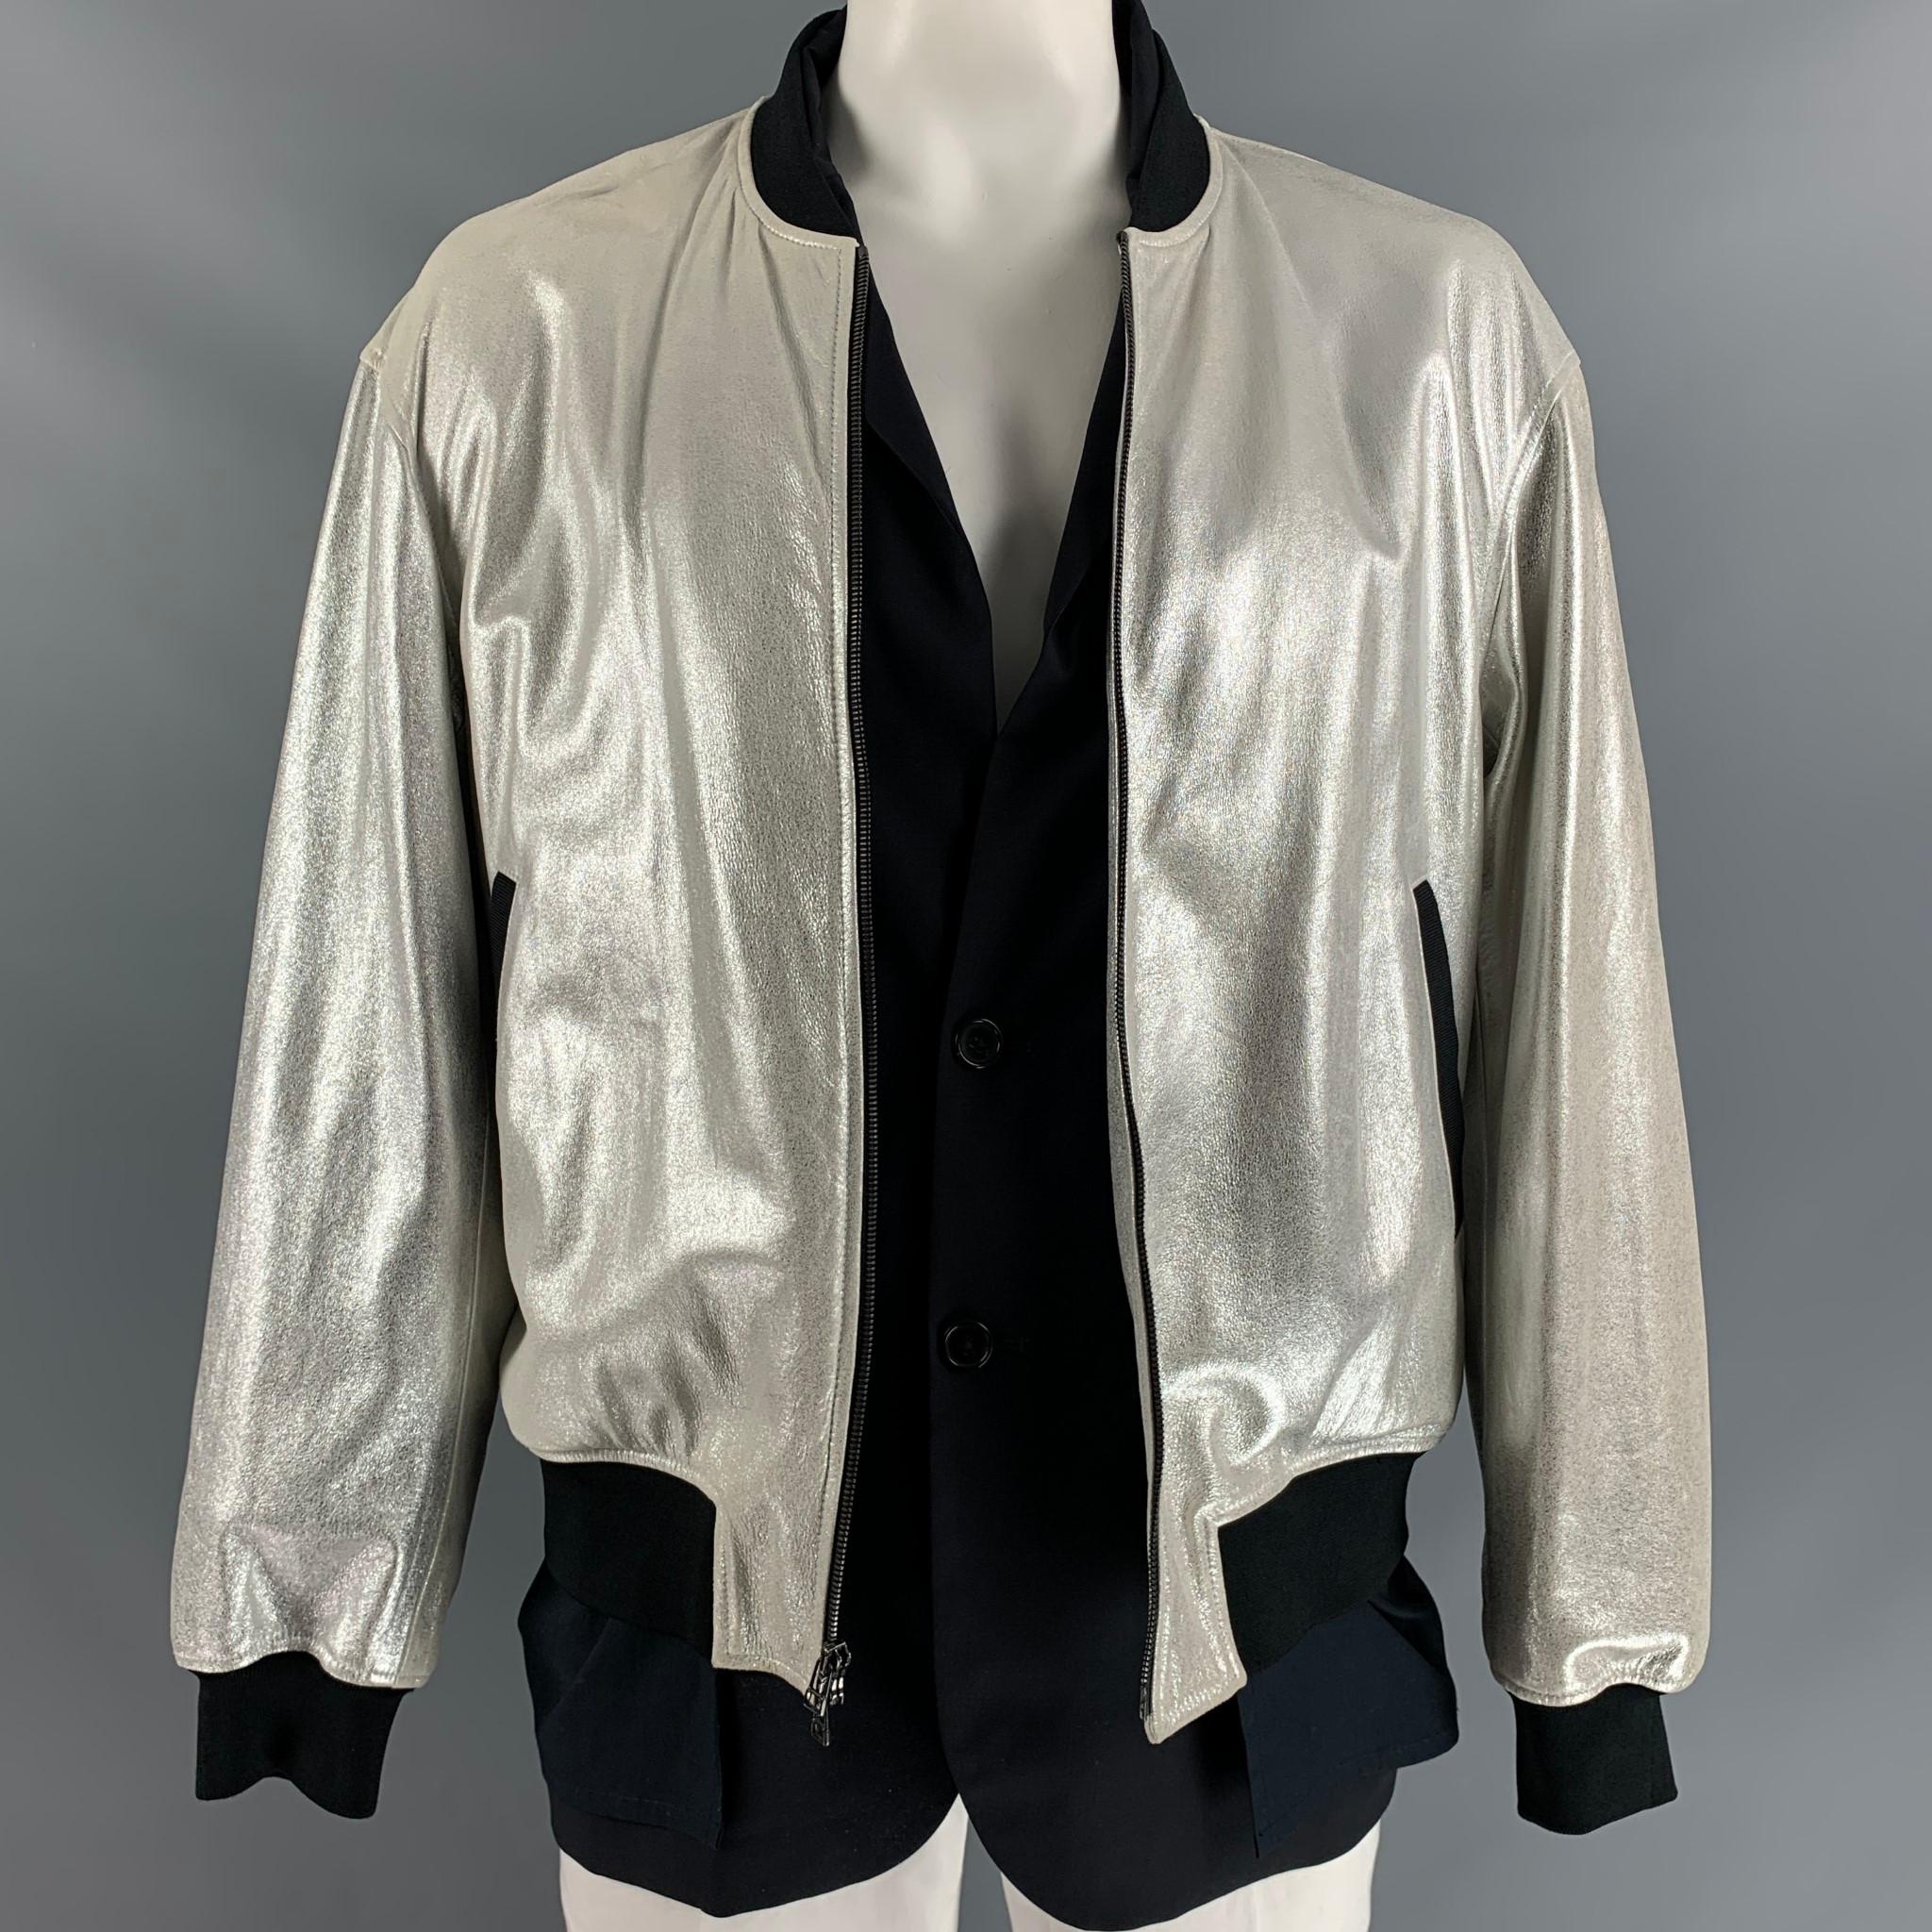 3.1 PHILLIP LIM bomber jacket, fully lined comes in silver lamb leather, black wool and cotton fabrics featuring simulated layers and two welt pockets at front.

Excellent Pre-Owned Condition.
Marked: L

Measurements:

Shoulder: 23 in
Chest: 52